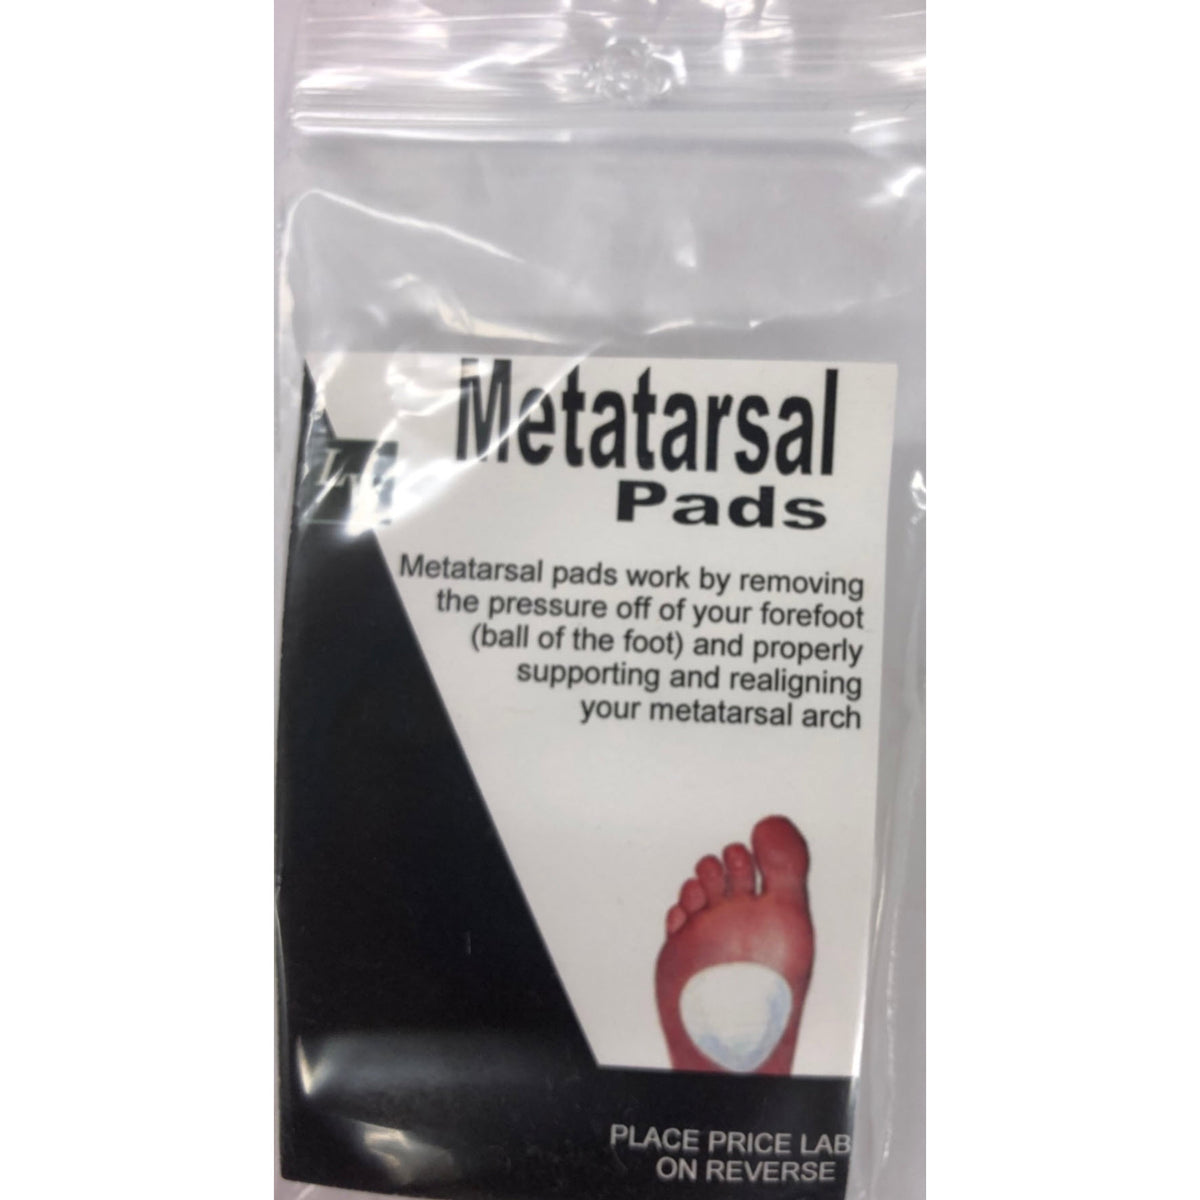 A package of Dr. Jill&#39;s LW FOOT CARE ADHESIVE METATARSAL PADS designed to relieve forefoot pressure and support the metatarsal arch, displayed against a white background. These foot care accessories are ideal for cushioning the ball of the